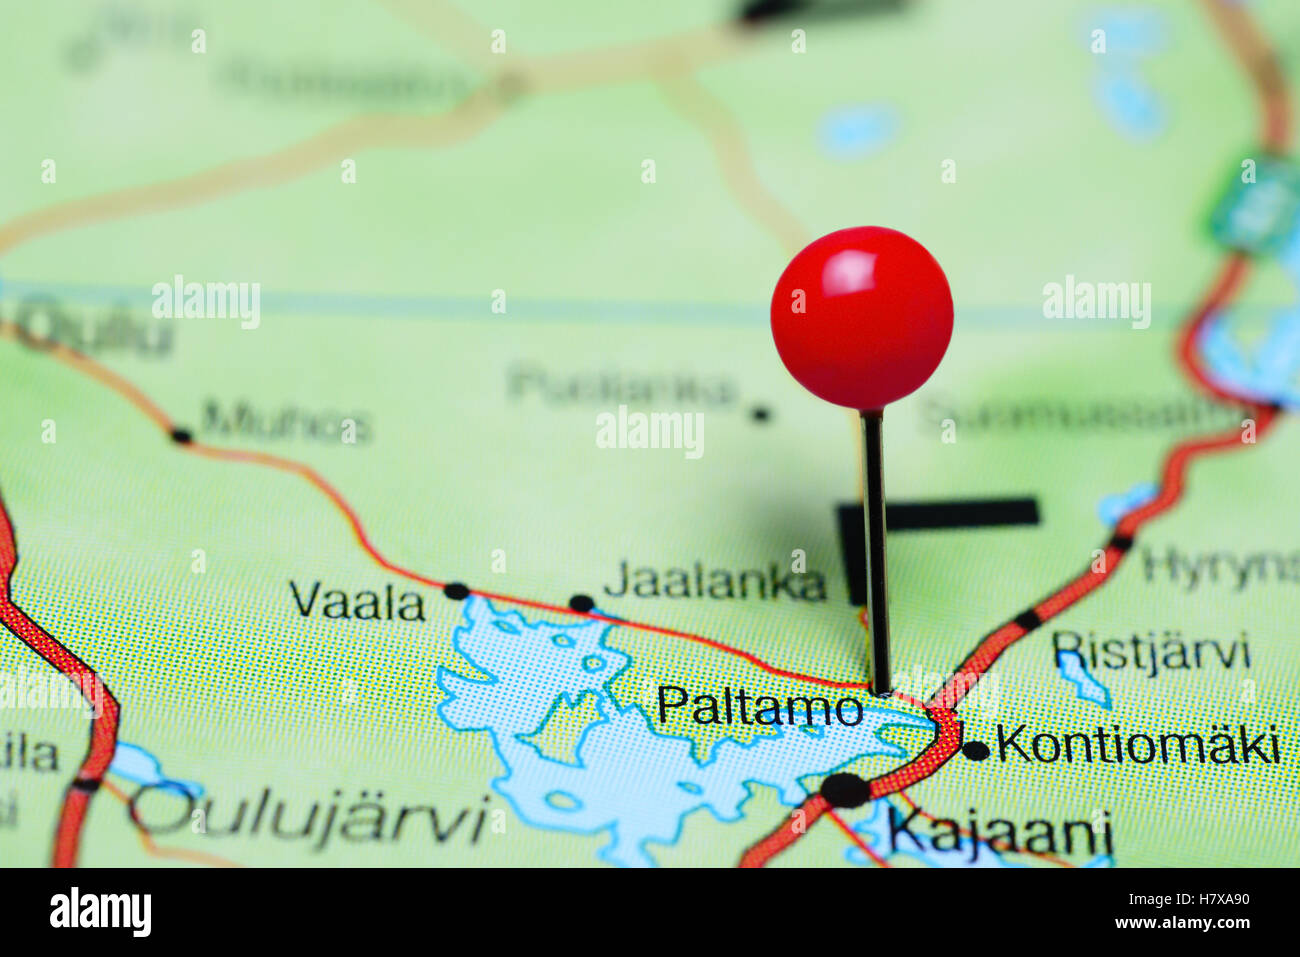 Paltamo pinned on a map of Finland Stock Photo